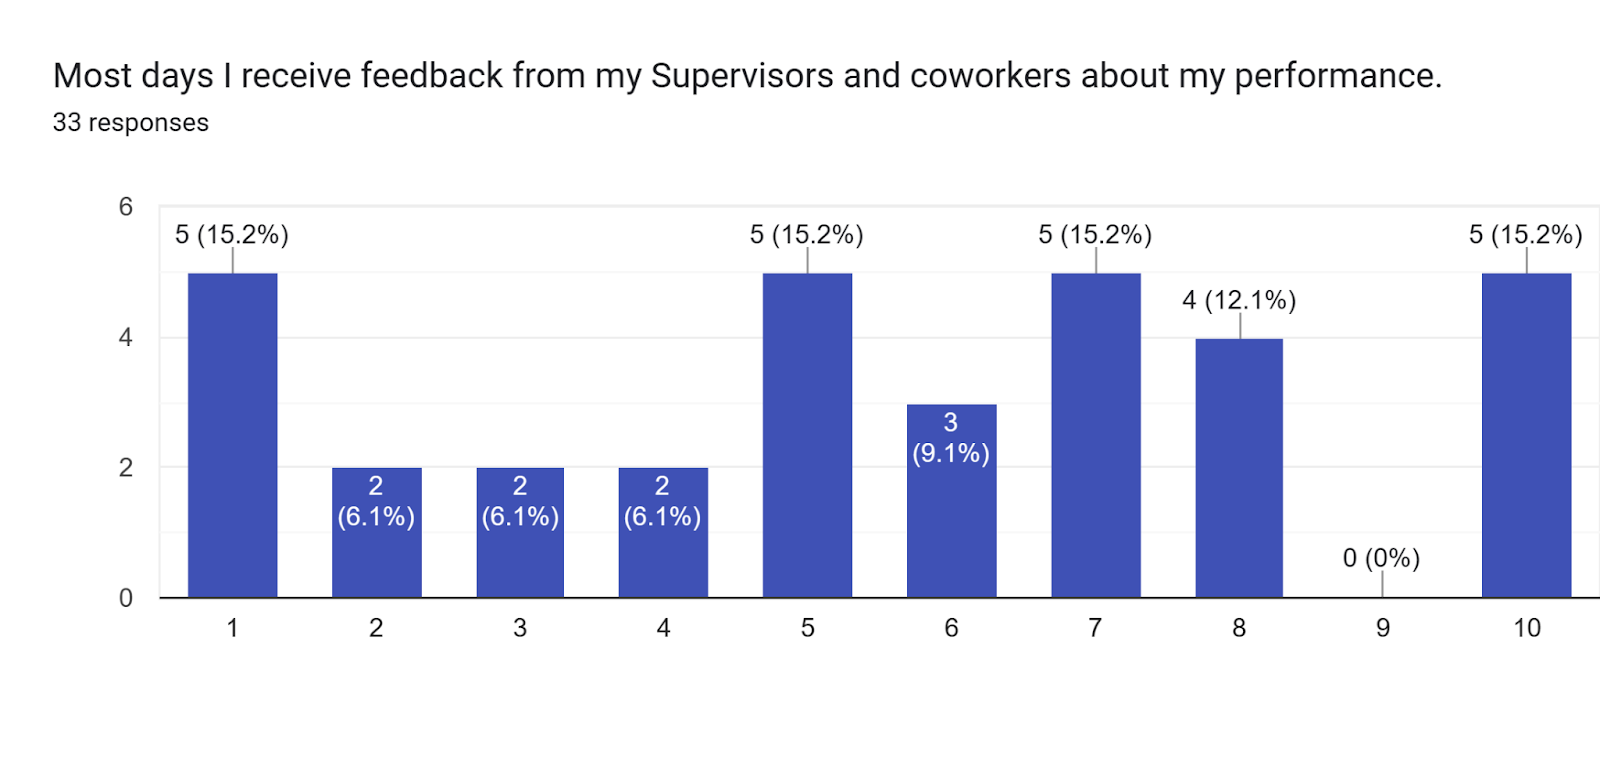 Forms response chart. Question title: Most days I receive feedback from my Supervisors and coworkers about my performance.. Number of responses: 33 responses.